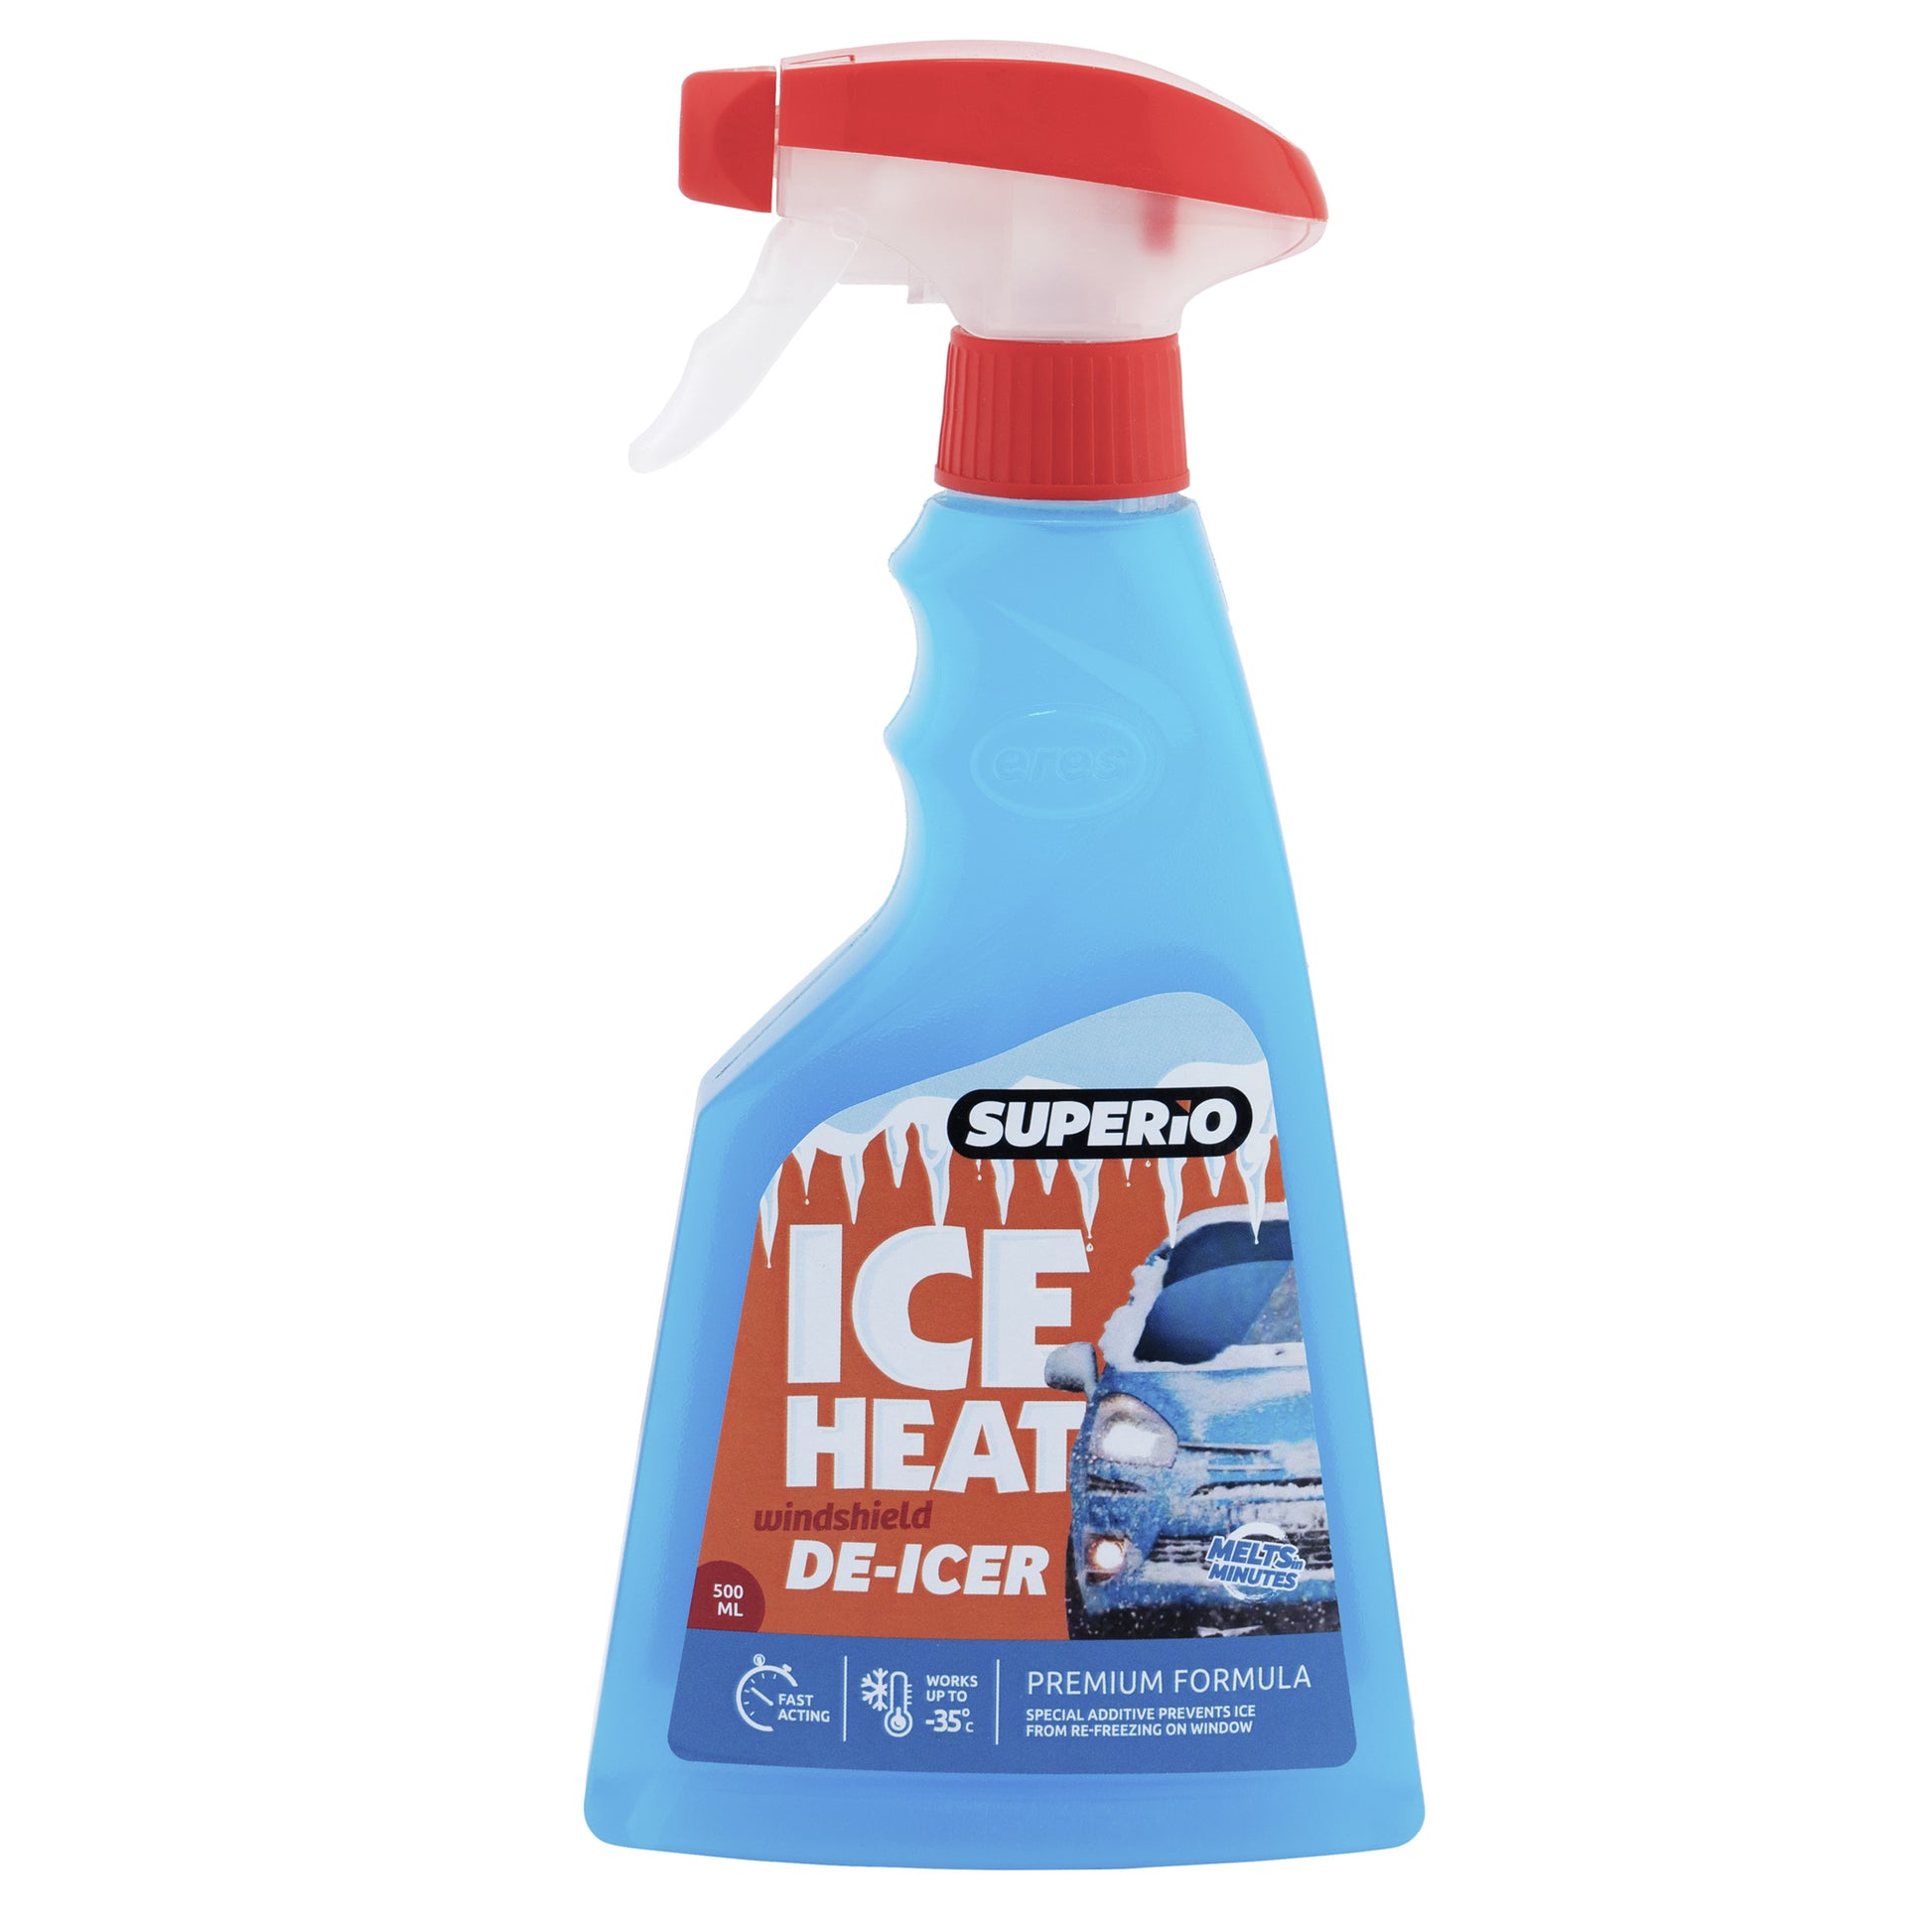 Car Windshield Deicer Ice Remover Agent Defroster Window Deicing